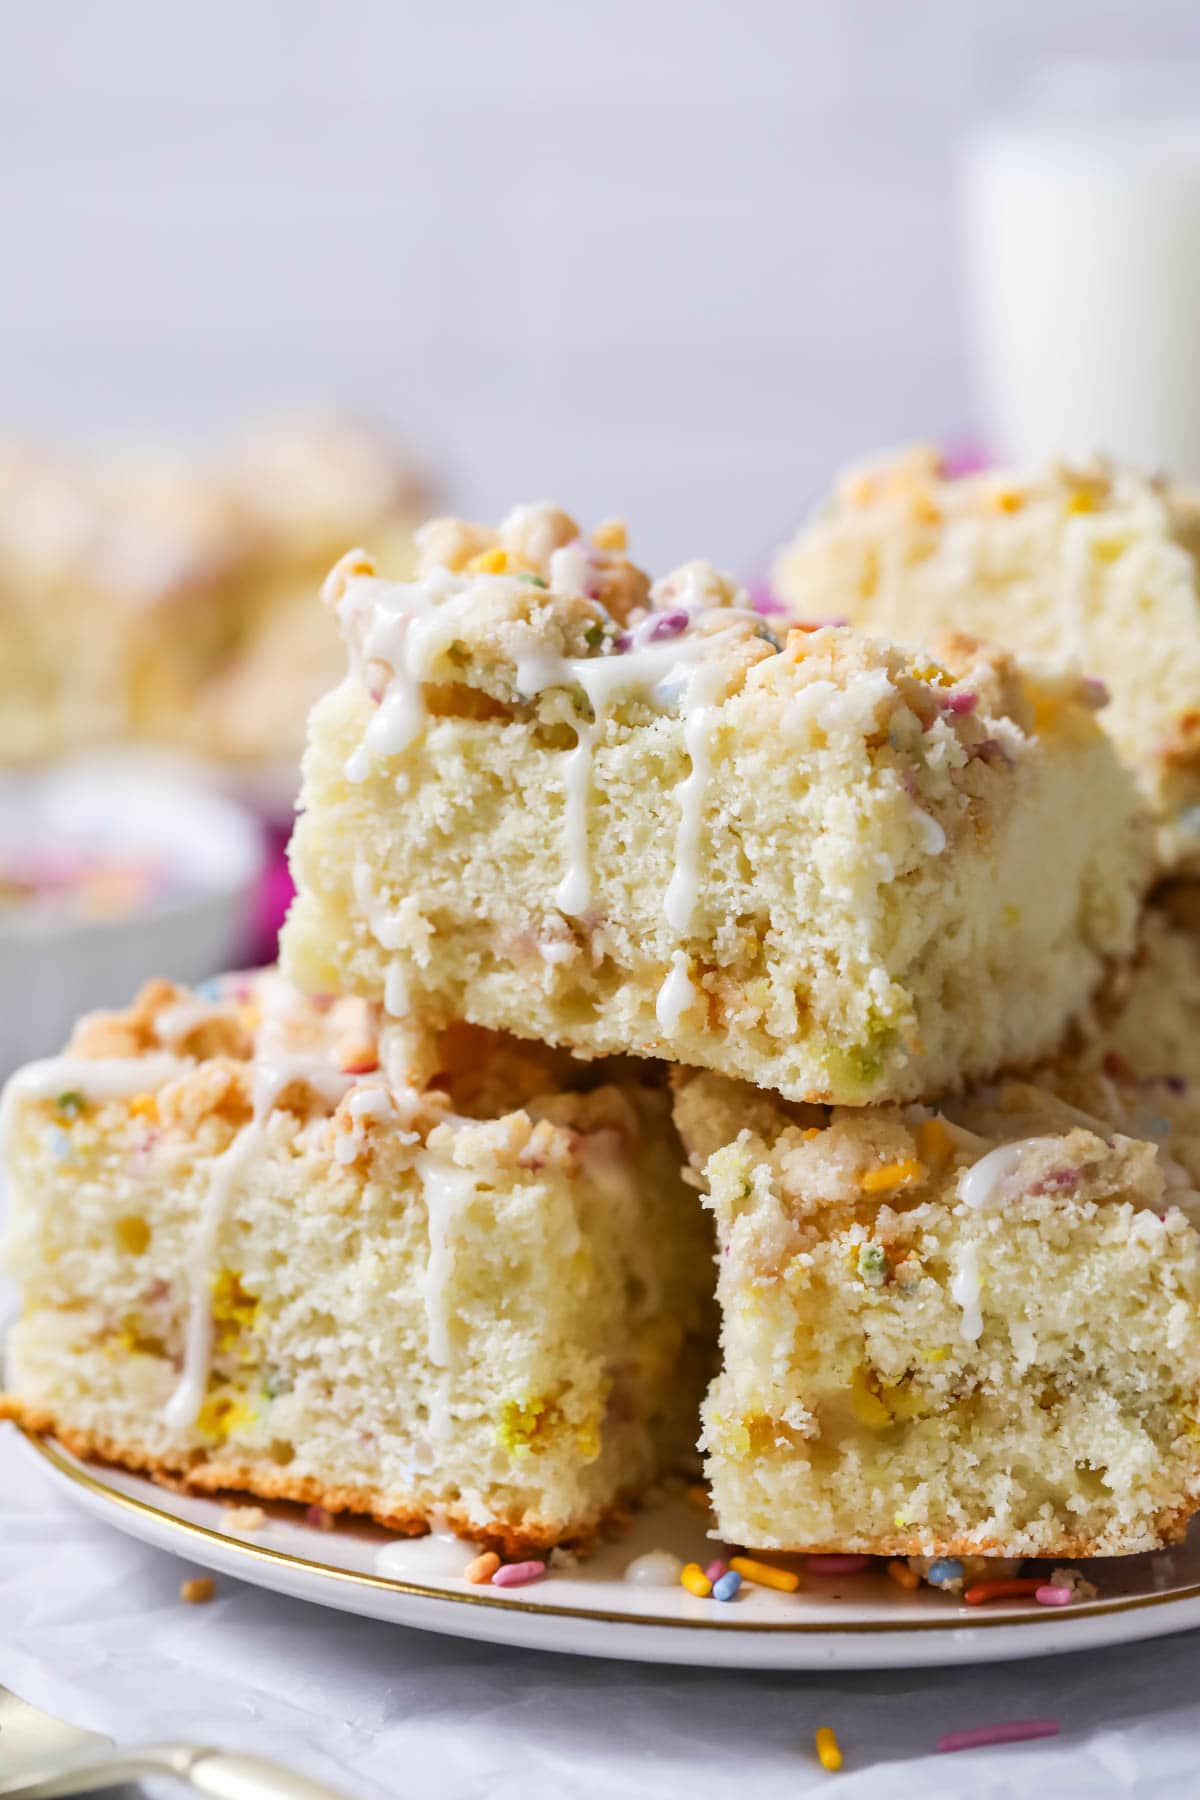 Square slices of crumb cake made with a sprinkle infused topping and vanilla glaze.